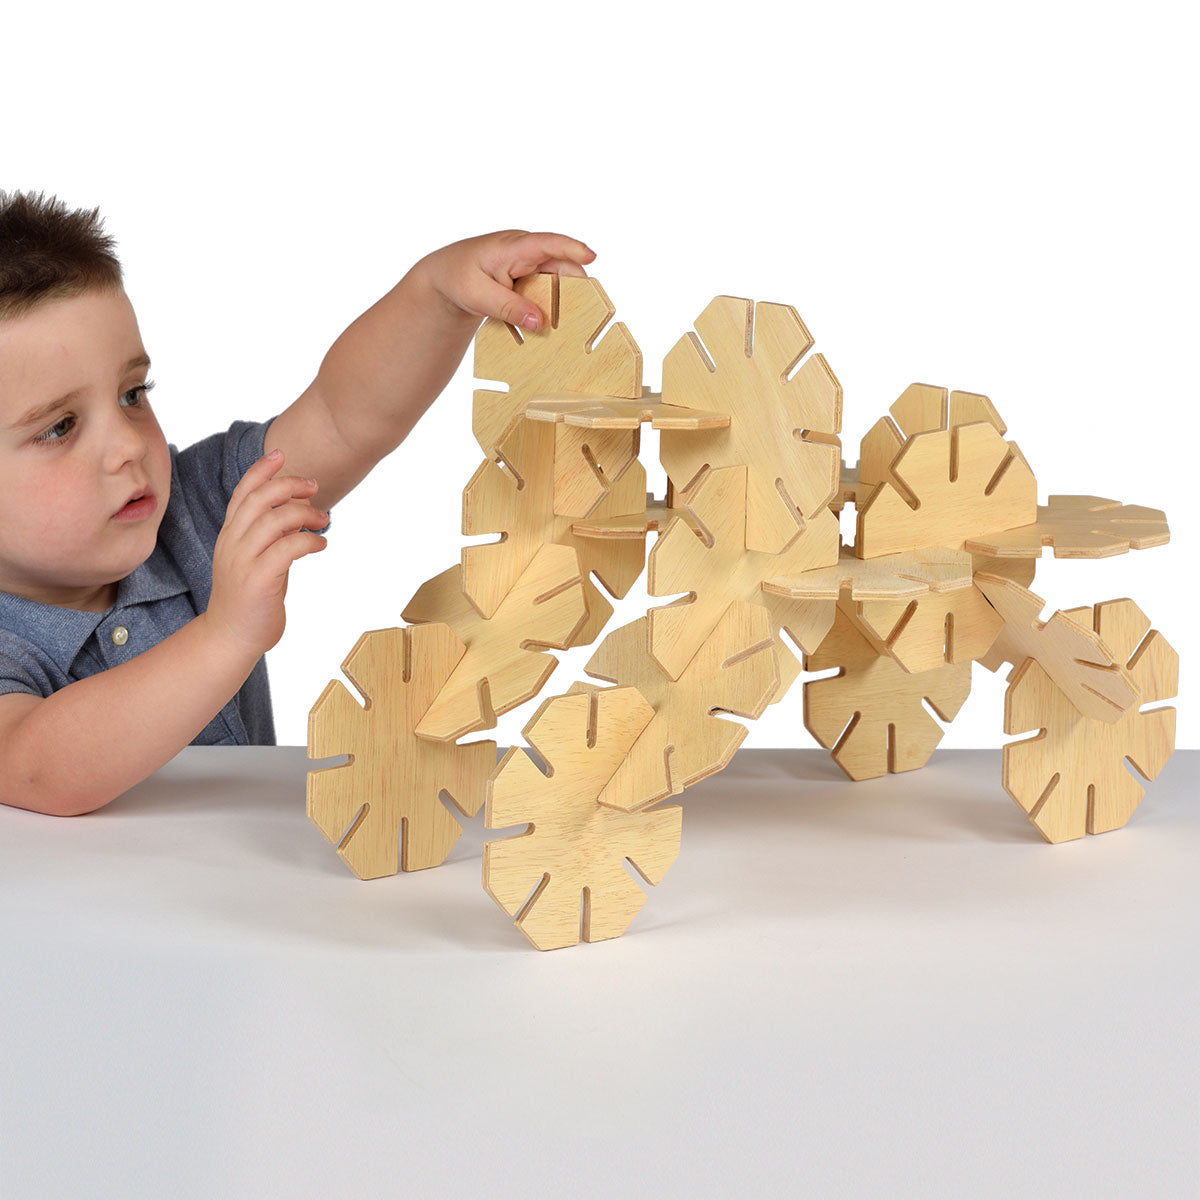 Natural Wooden Octoplay, Following the provided guide, children can create animals and patterns with these natural wood octagonal pieces. They're perfect for small hands, with an easy slot together feature. Unique octagonal wooden shapes which interlock to encourage creative construction play. This Natural Wooden Octoplay set of 20 unique wooden construction shapes can be used to create various models such as a person, a dog or a tower. Made from high quality plywood in a beautiful natural finish, the piece